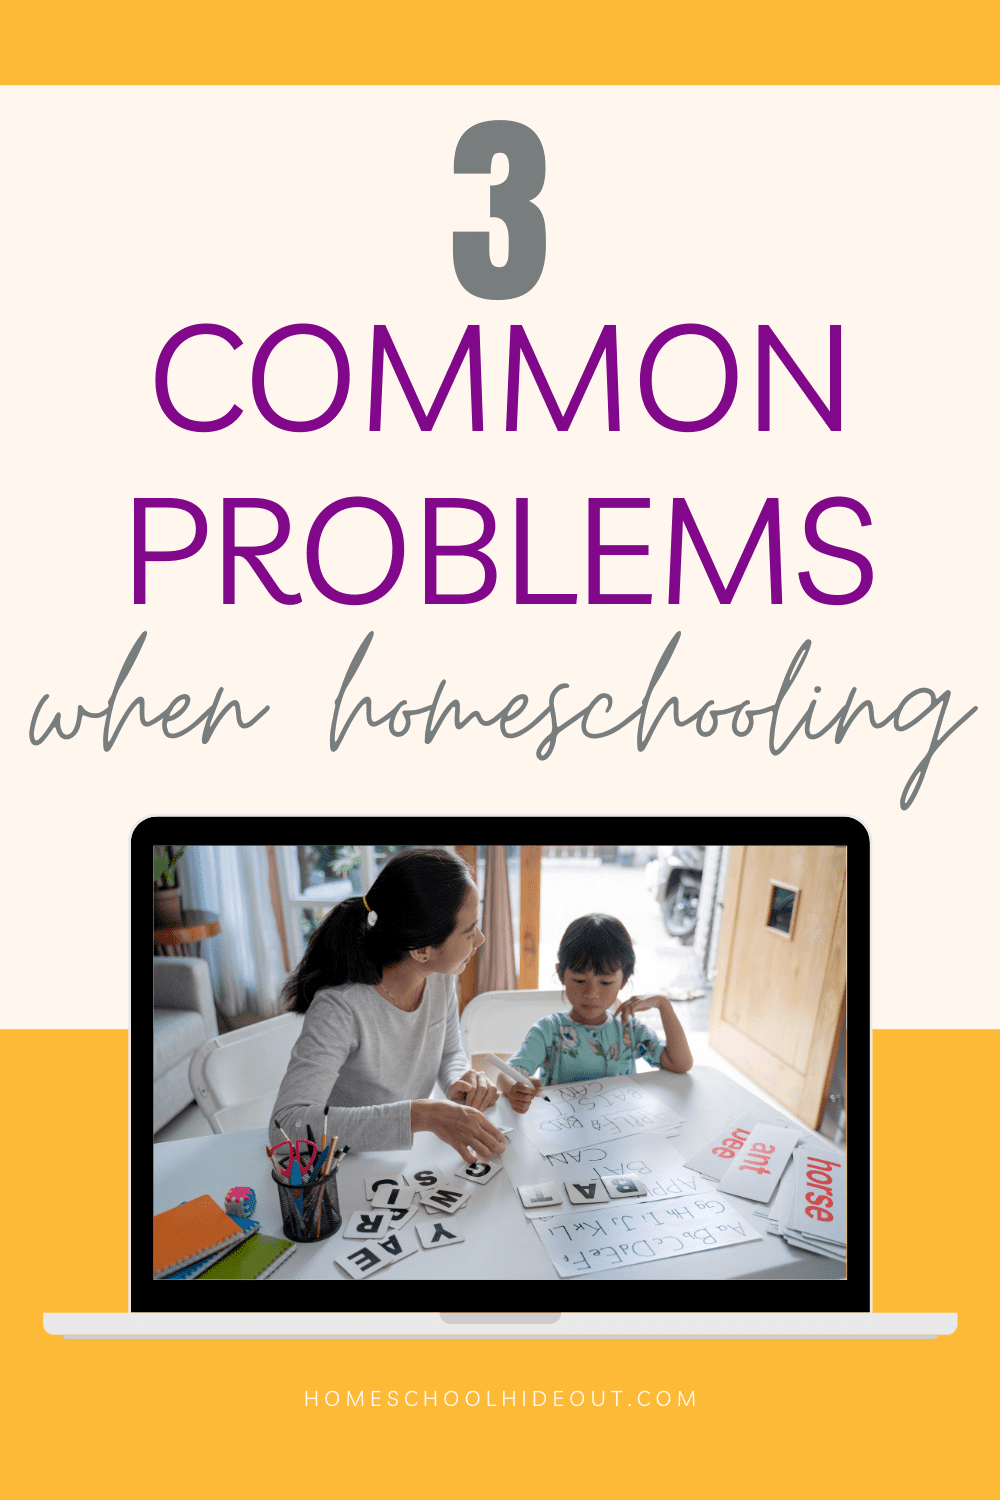 There are often problems with homeschooling but I like these ideas to keep everything going as smooth as possible!